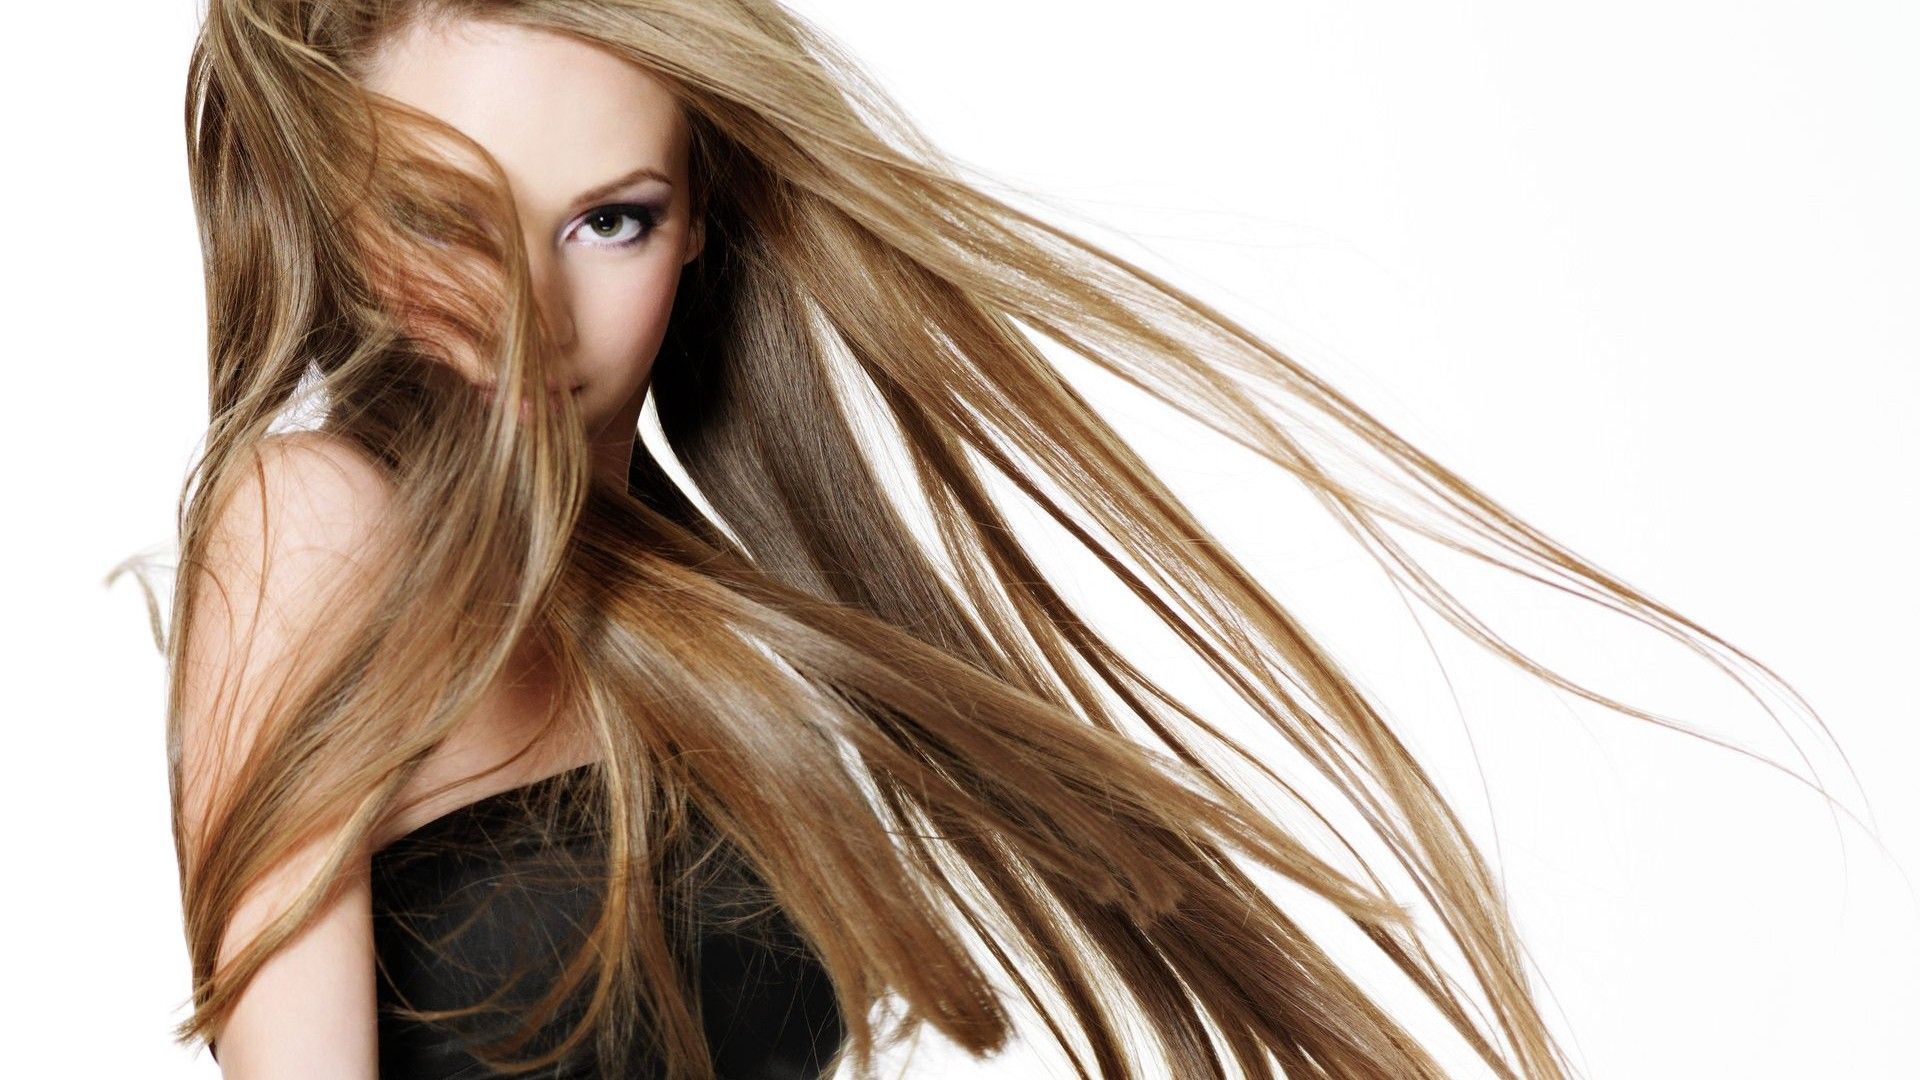 Women Long Hair Style Wallpapers - Wallpaper Cave